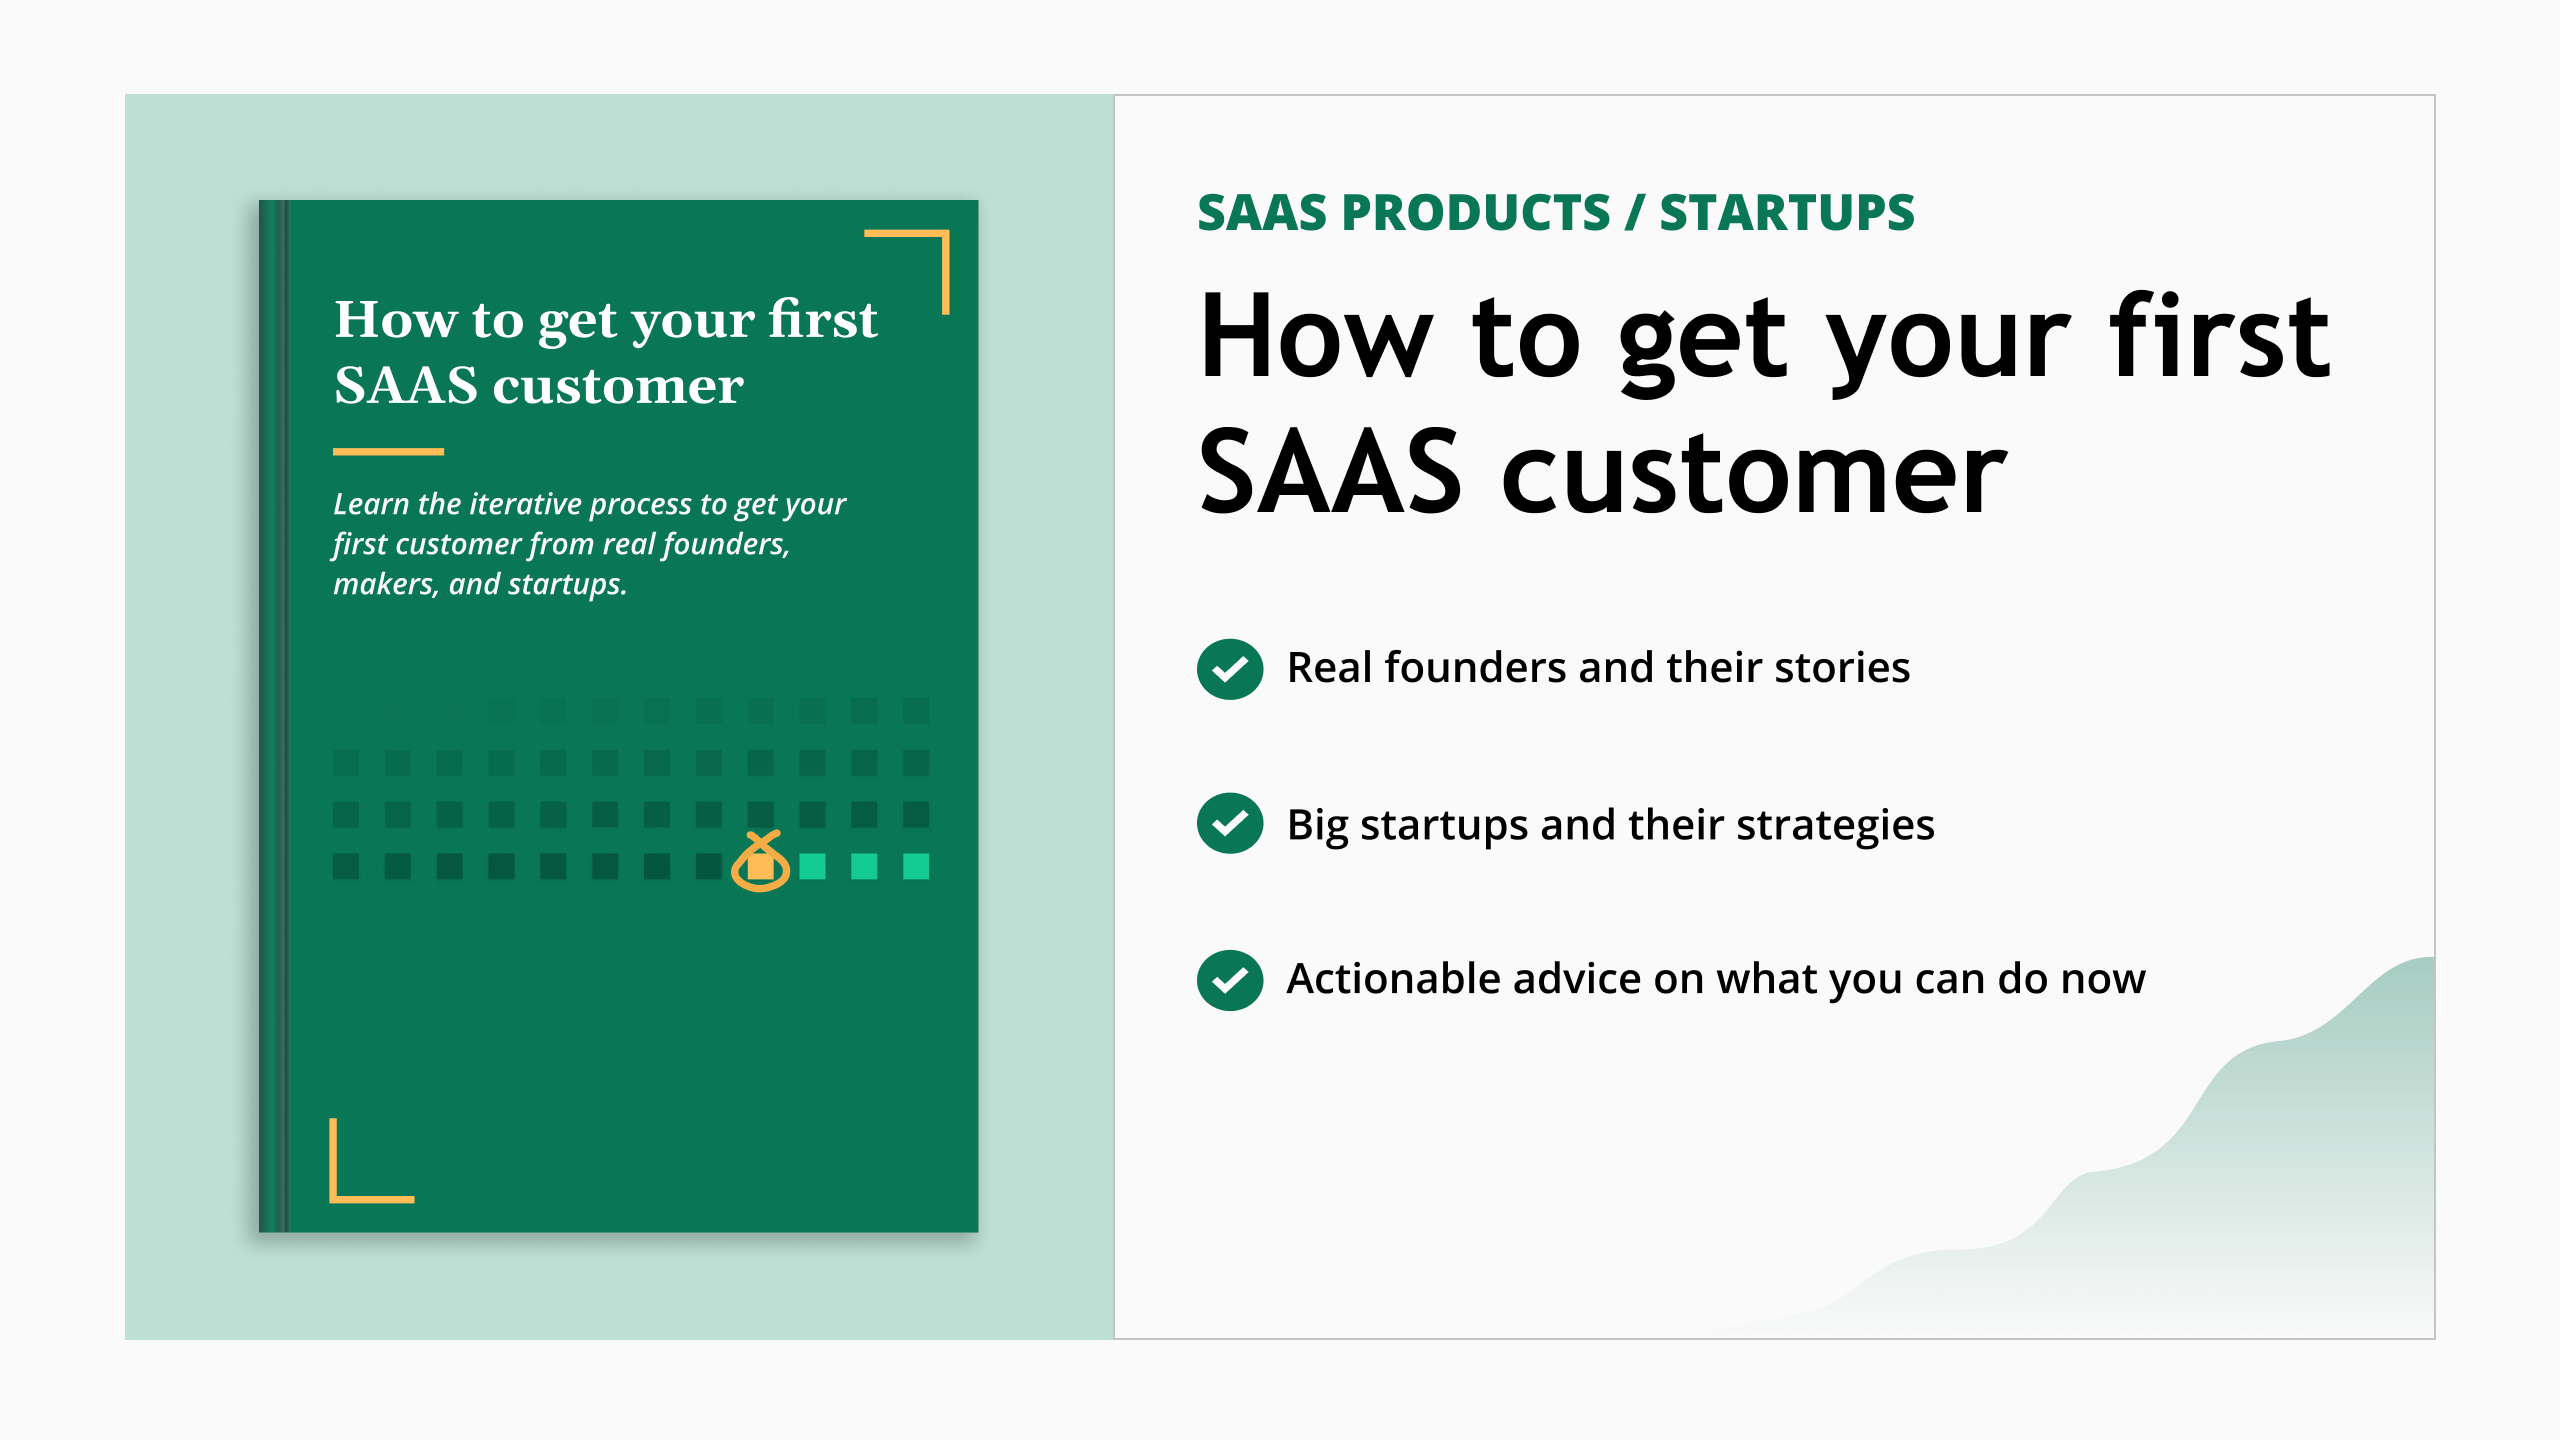 How to get your first SAAS customer media 1